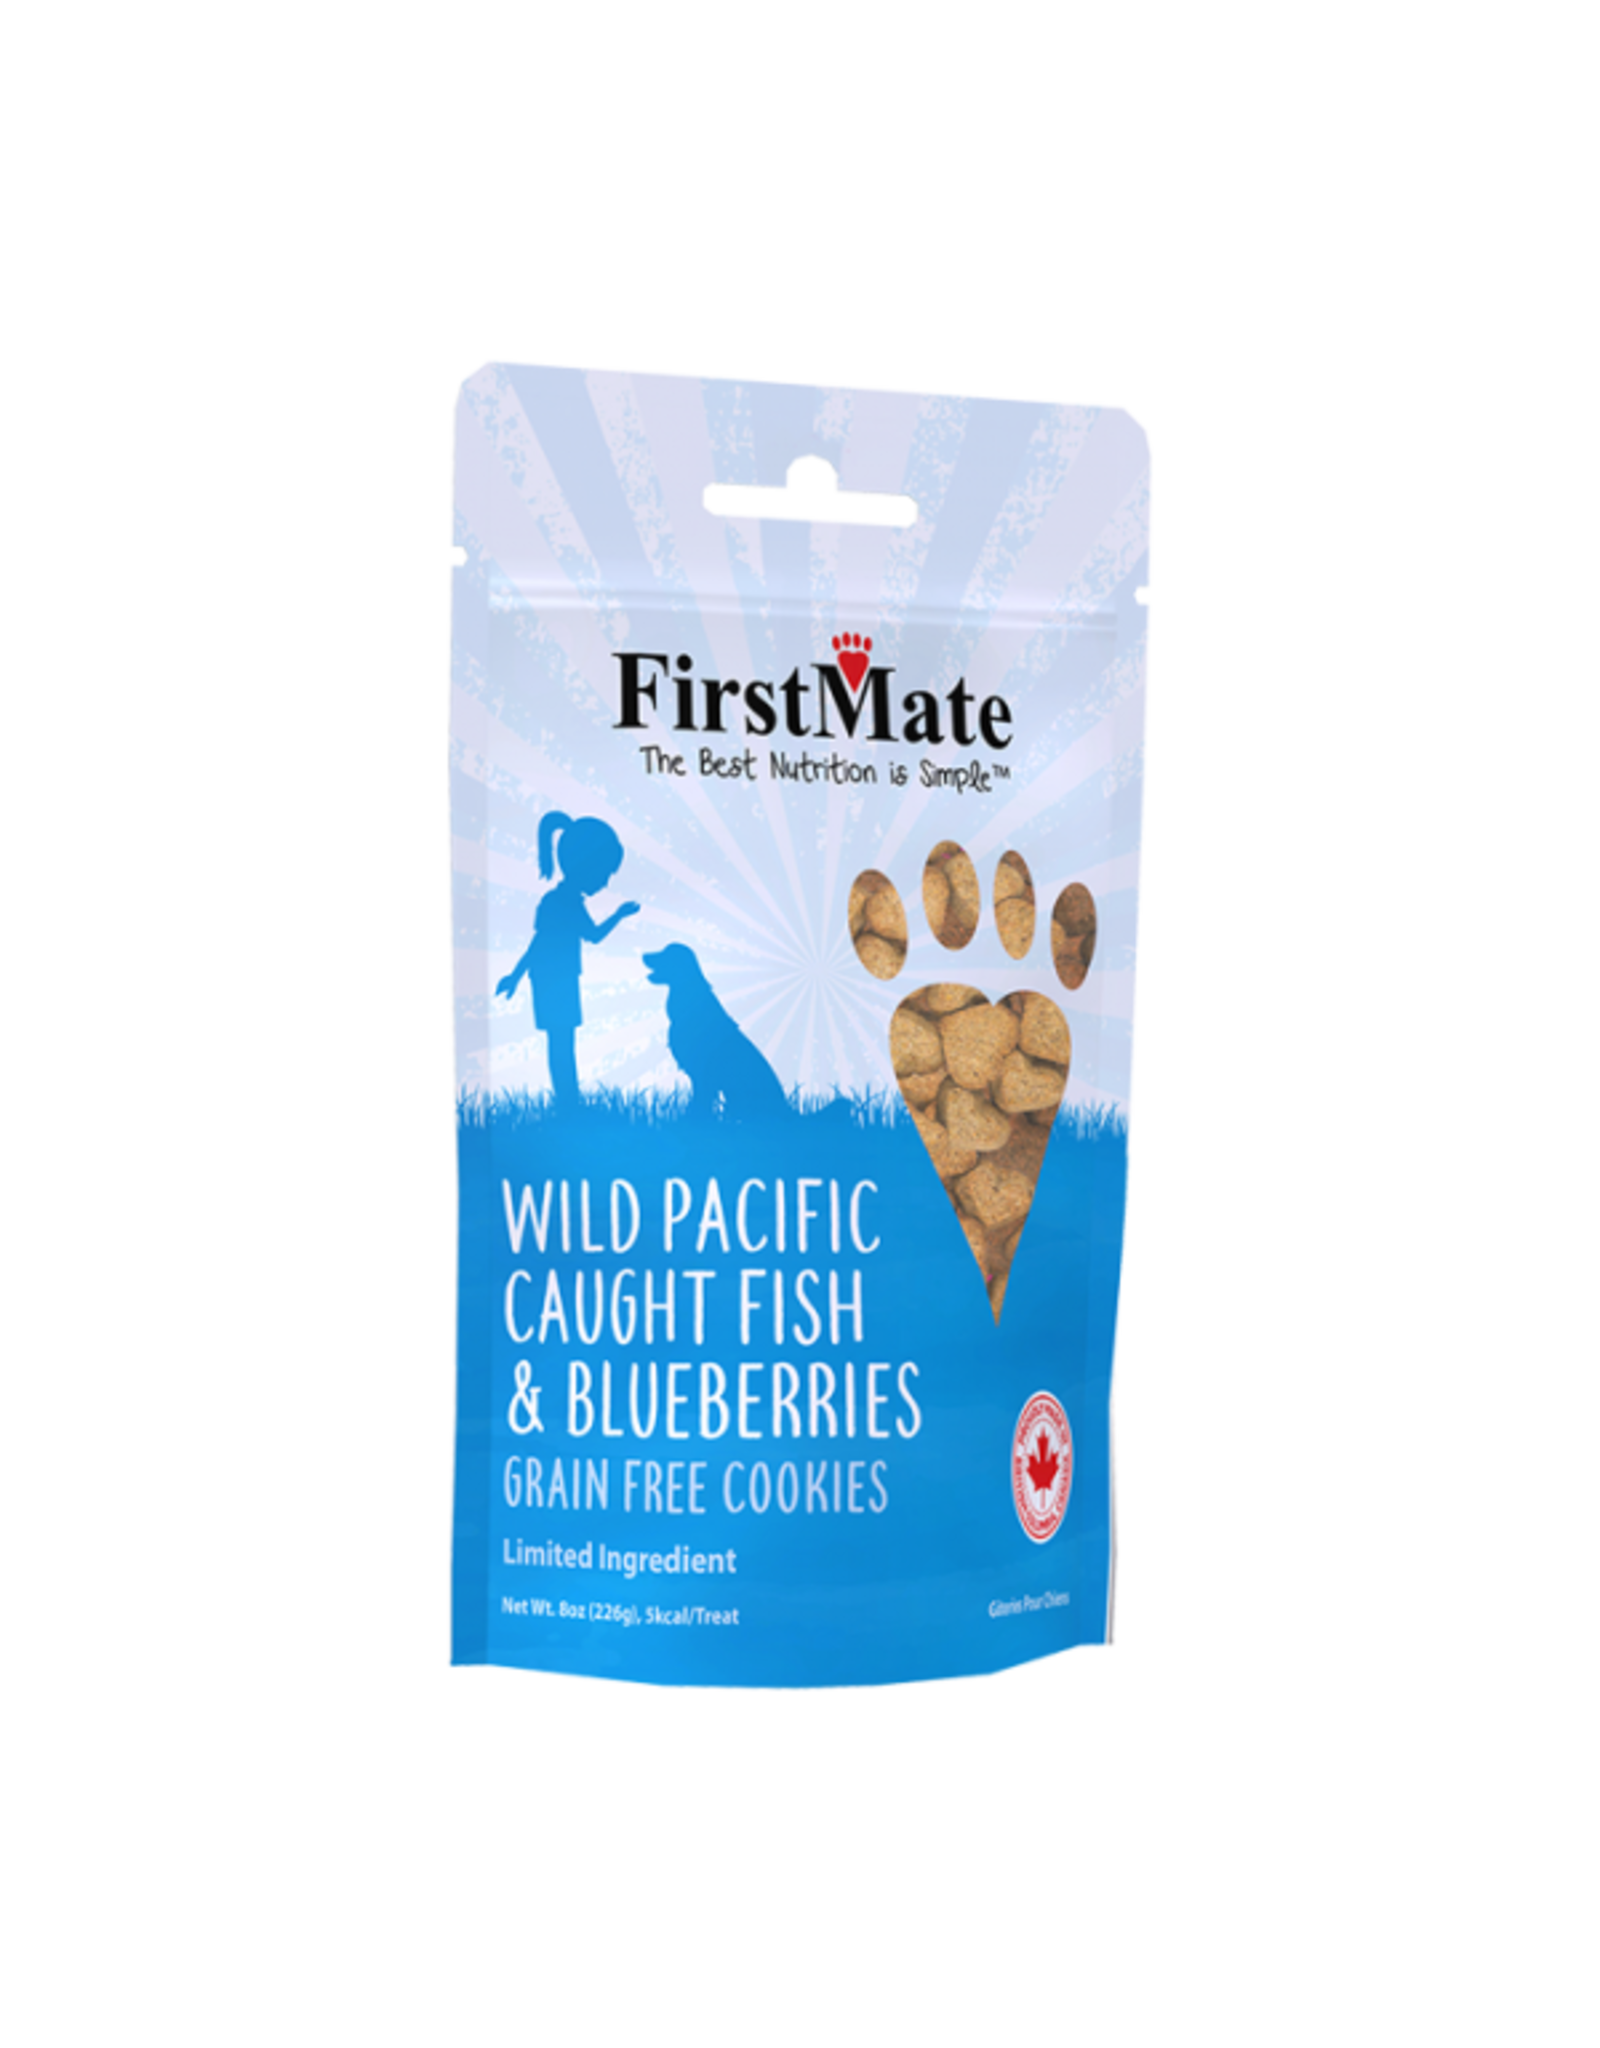 FirstMate Wild Pacific Caught Fish & Blueberries Cookies 8oz